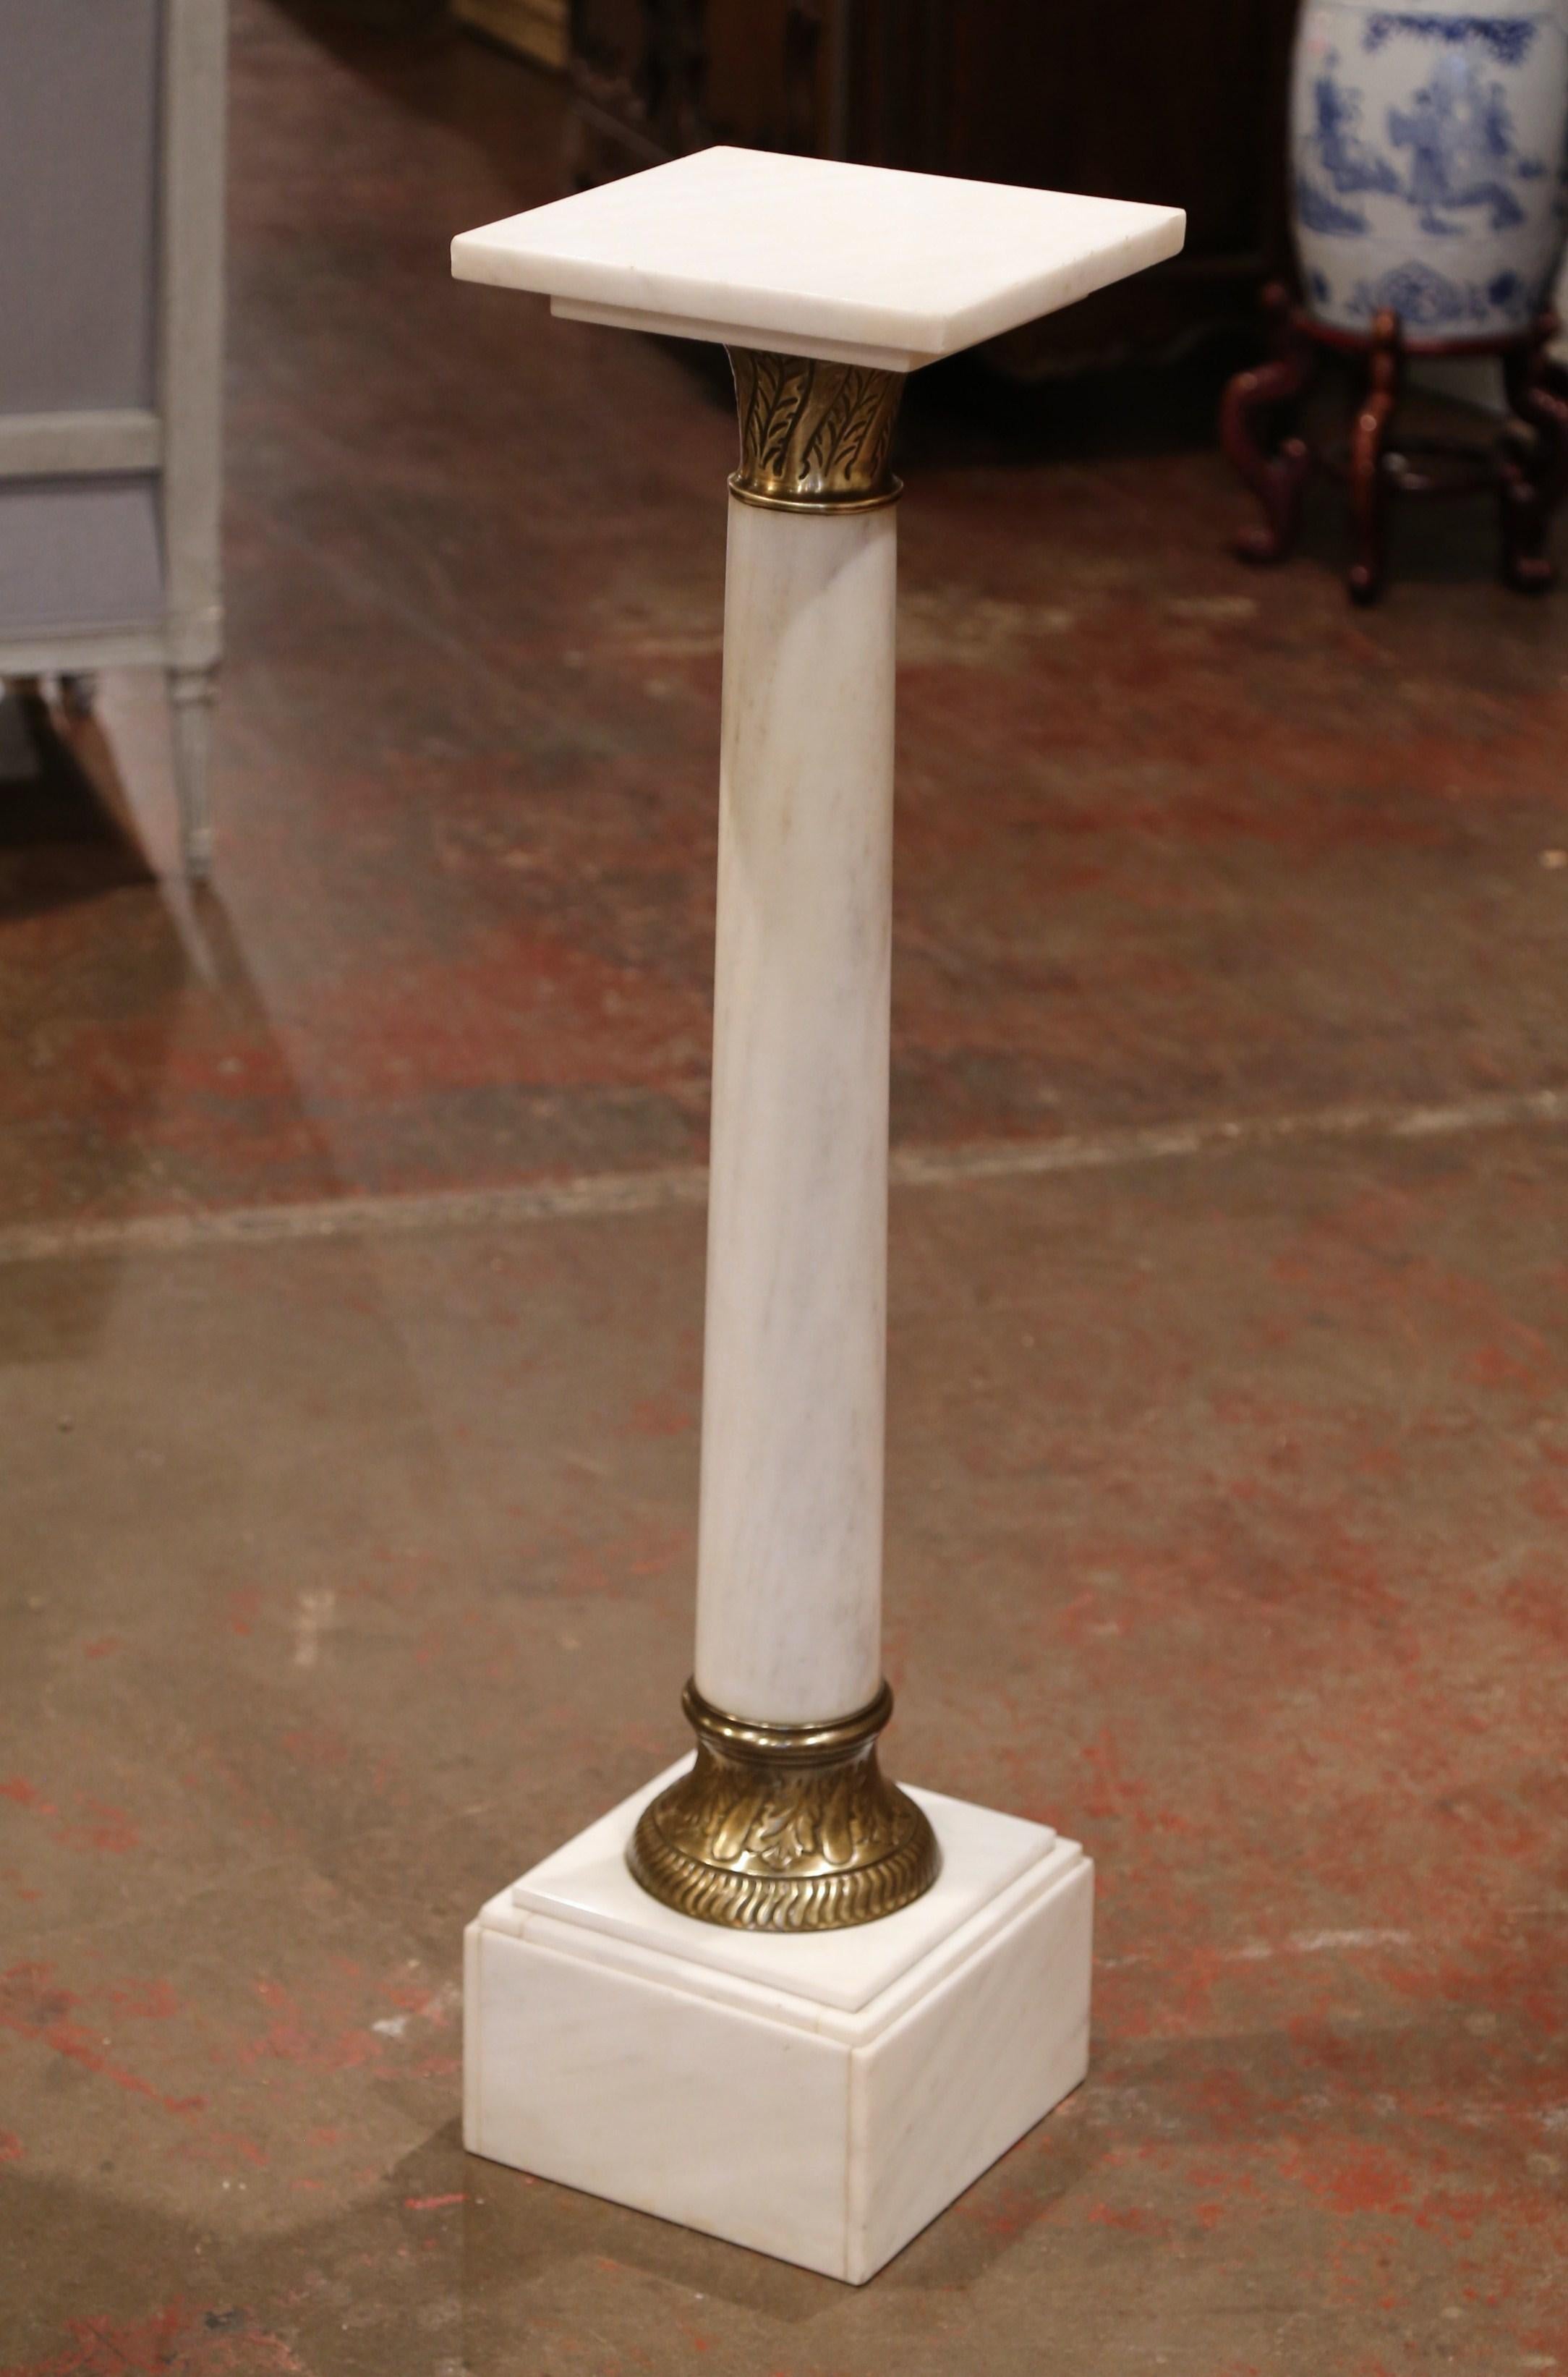 This elegant, antique white marble pedestal table was crafted in France, circa 1870. The Napoleon III pedestal sits on a sturdy square plinth base embellished with a repousse leaf motif brass mount at the bottom. The tall, round stem is decorated at